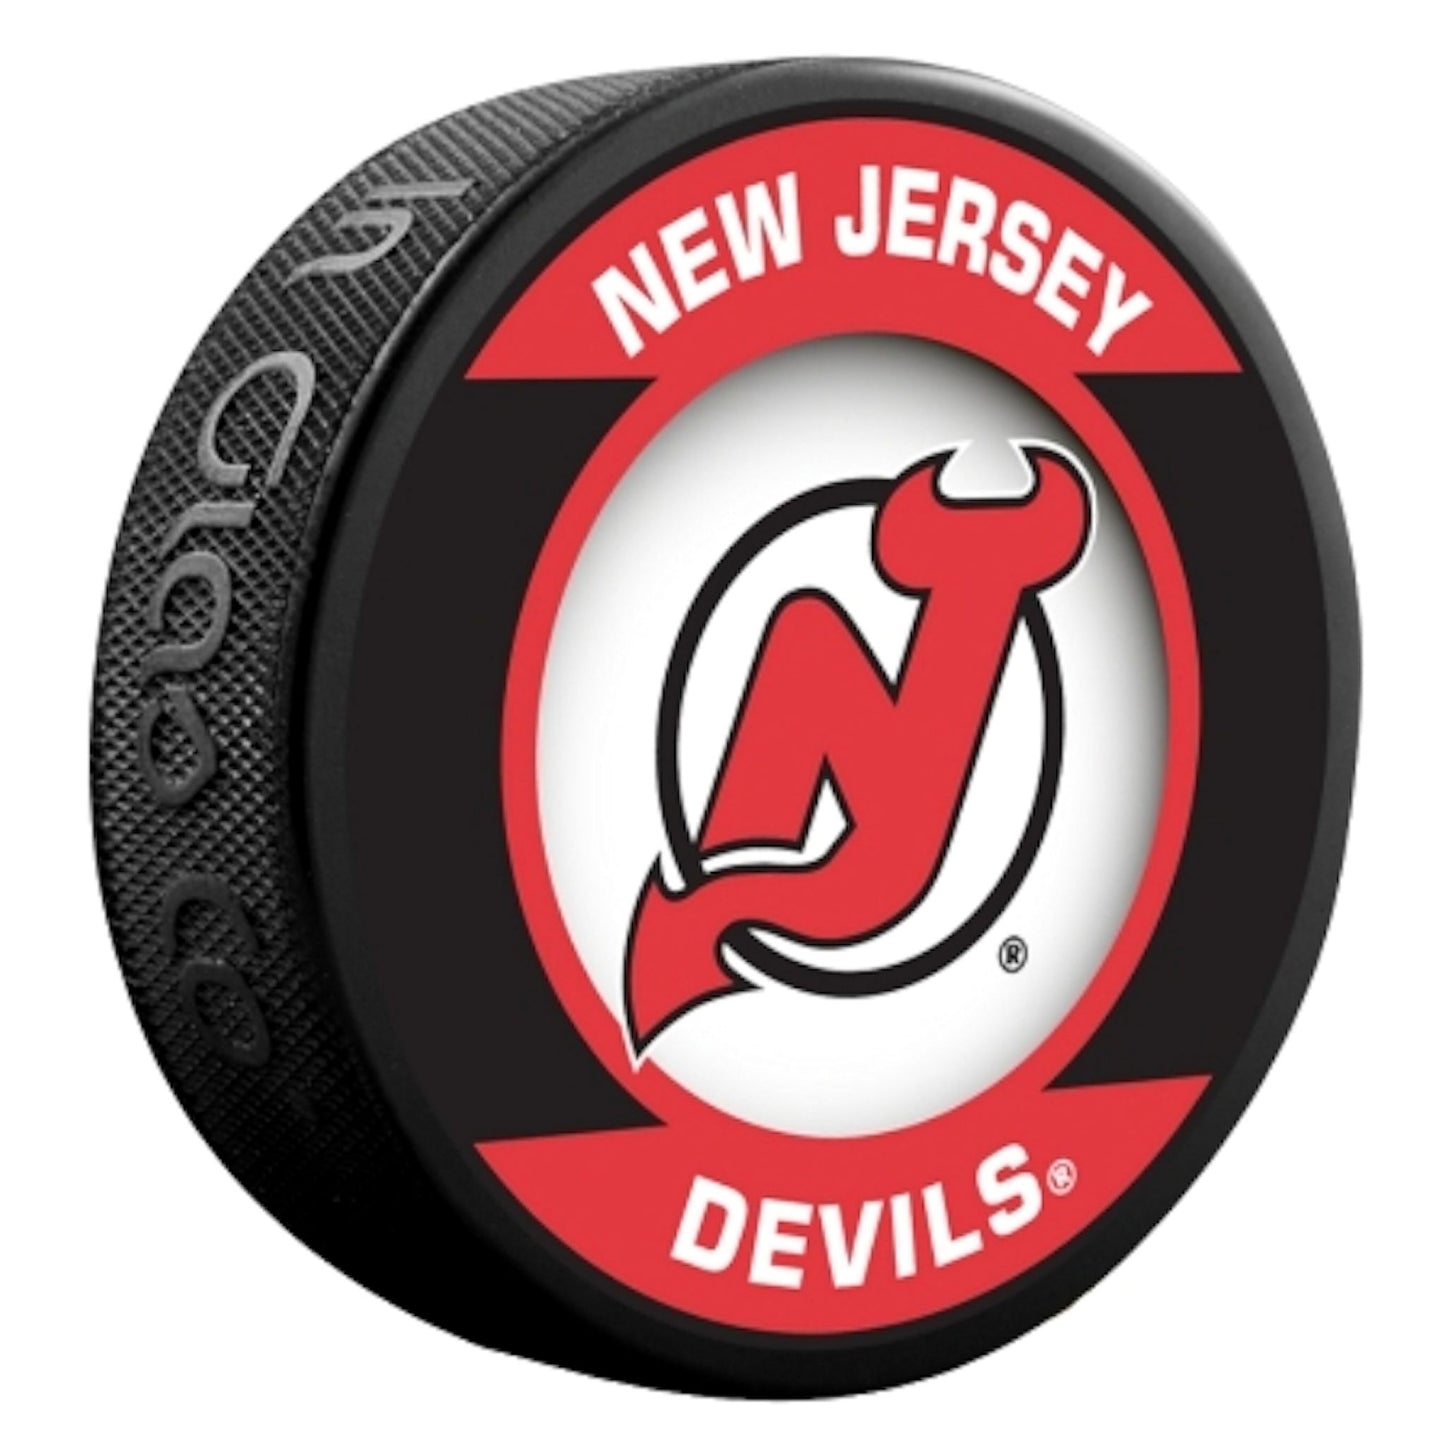 New Jersey Devils Retro Series Collectible Hockey Puck